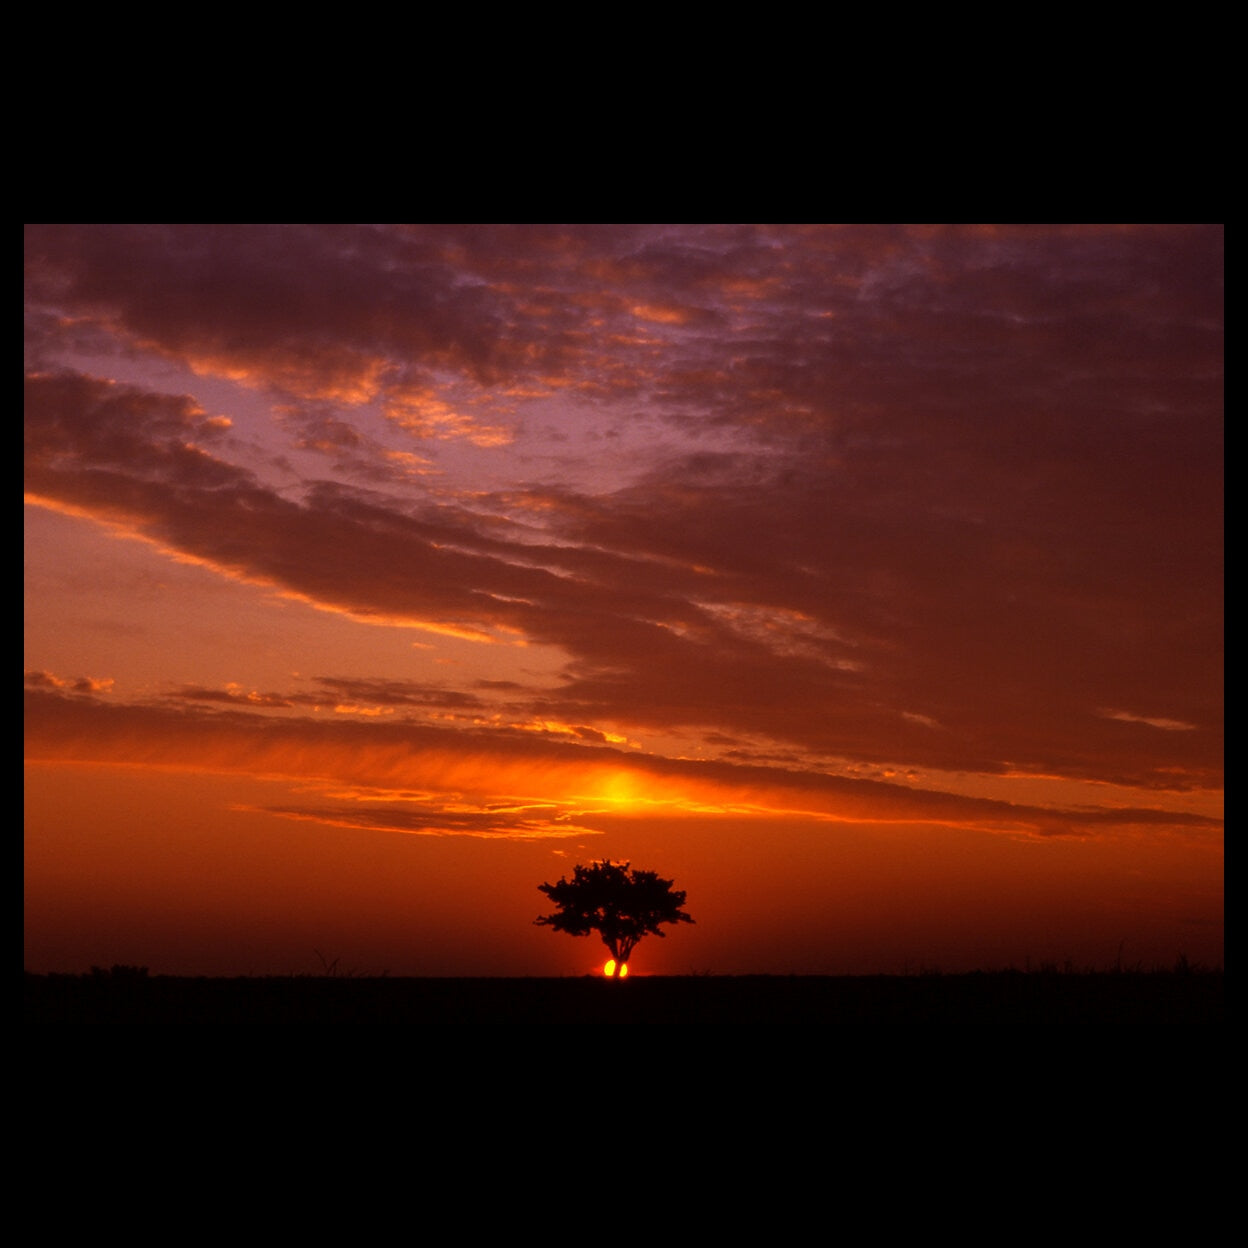 Barren field with a single sprawling tree in the middle and a beautiful sunset landscape.